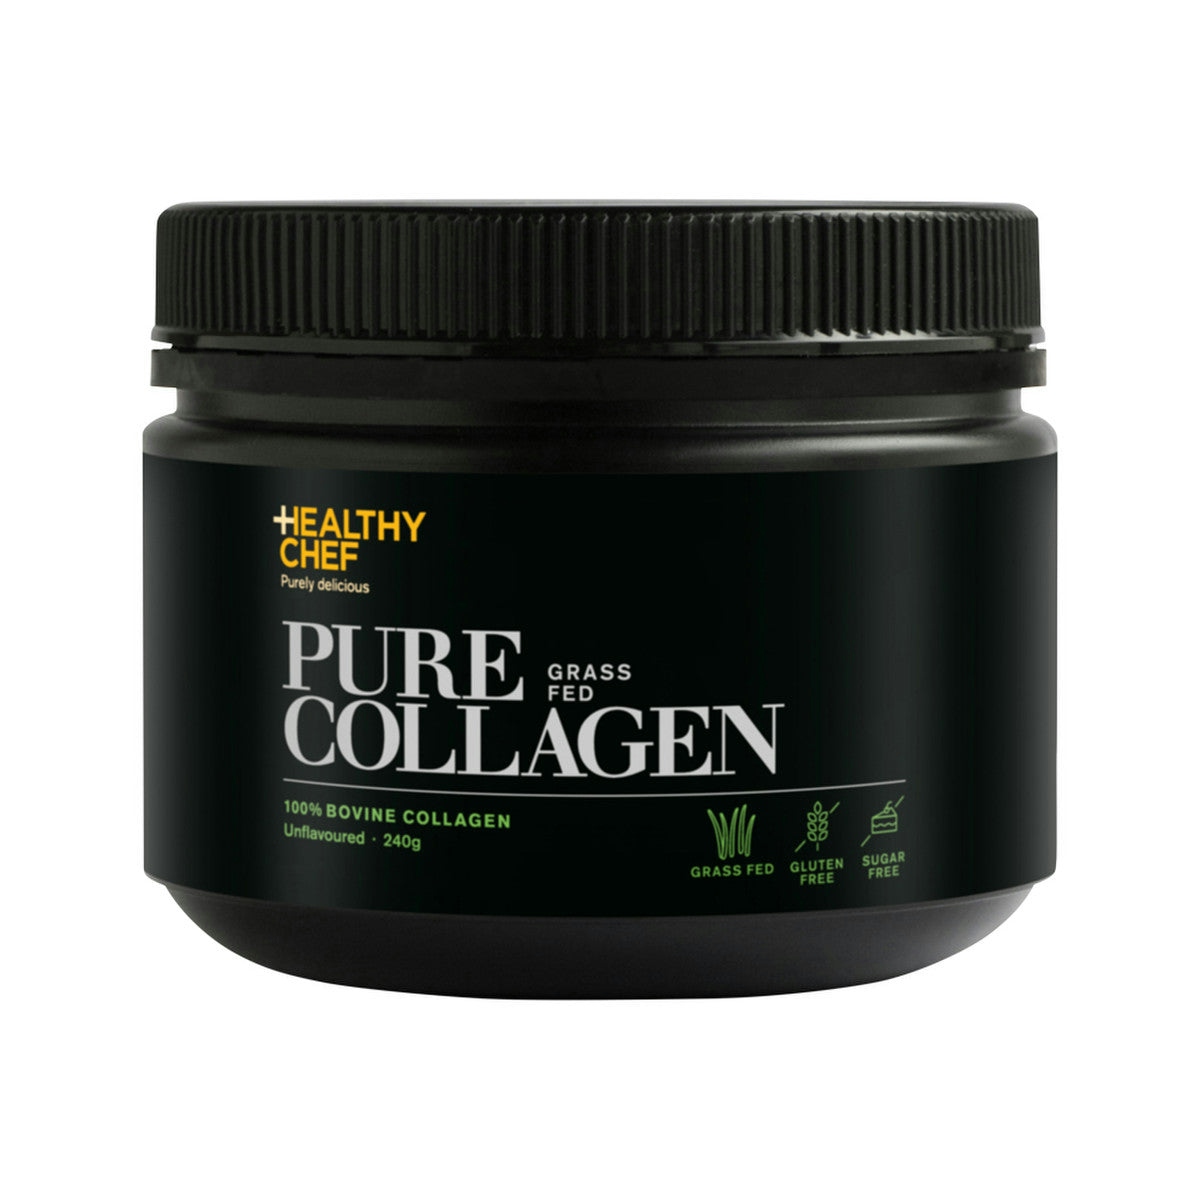 image of The Healthy Chef Pure Grass Fed Collagen (100% Bovine Collagen) Unflavoured 240g on white background